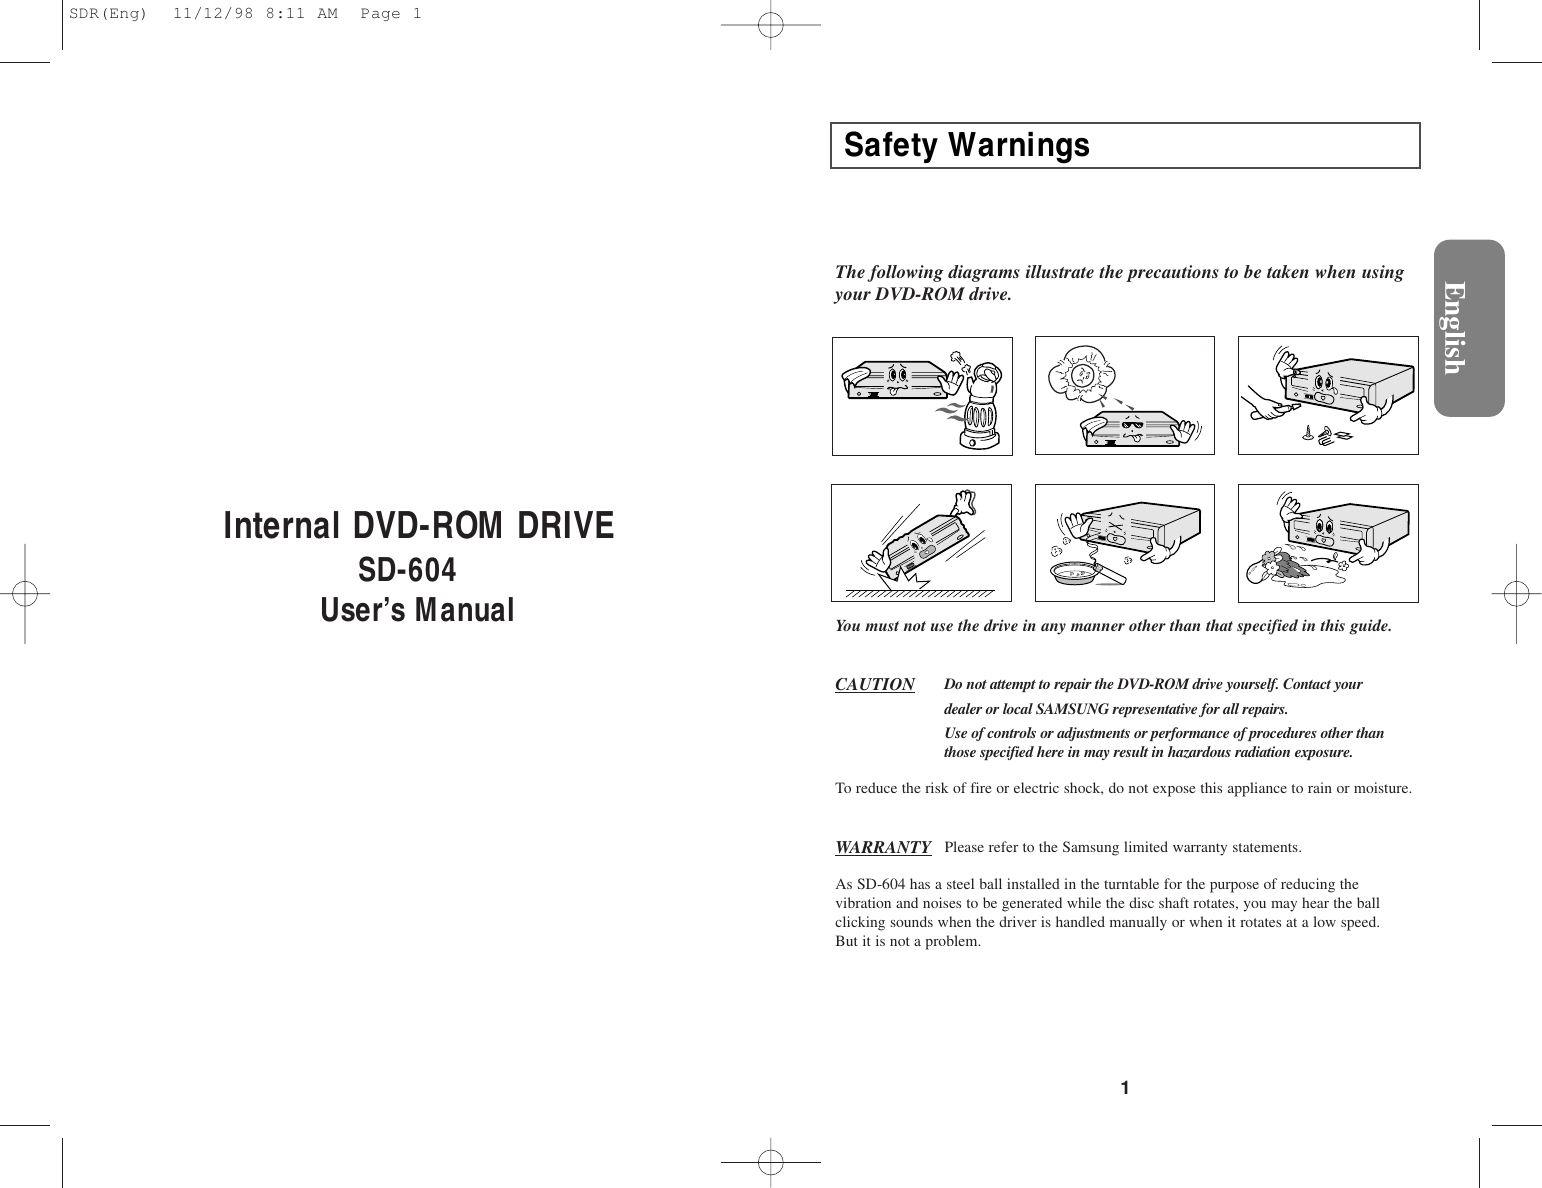 1Internal DVD-ROM DRIVESD-604User’s ManualEnglishSafety WarningsThe following diagrams illustrate the precautions to be taken when usingyour DVD-ROM drive.You must not use the drive in any manner other than that specified in this guide.CAUTION Do not attempt to repair the DVD-ROM drive yourself. Contact your dealer or local SAMSUNG representative for all repairs.Use of controls or adjustments or performance of procedures other thanthose specified here in may result in hazardous radiation exposure.WARRANTY Please refer to the Samsung limited warranty statements.To reduce the risk of fire or electric shock, do not expose this appliance to rain or moisture.As SD-604 has a steel ball installed in the turntable for the purpose of reducing thevibration and noises to be generated while the disc shaft rotates, you may hear the ballclicking sounds when the driver is handled manually or when it rotates at a low speed.But it is not a problem.SDR(Eng)  11/12/98 8:11 AM  Page 1